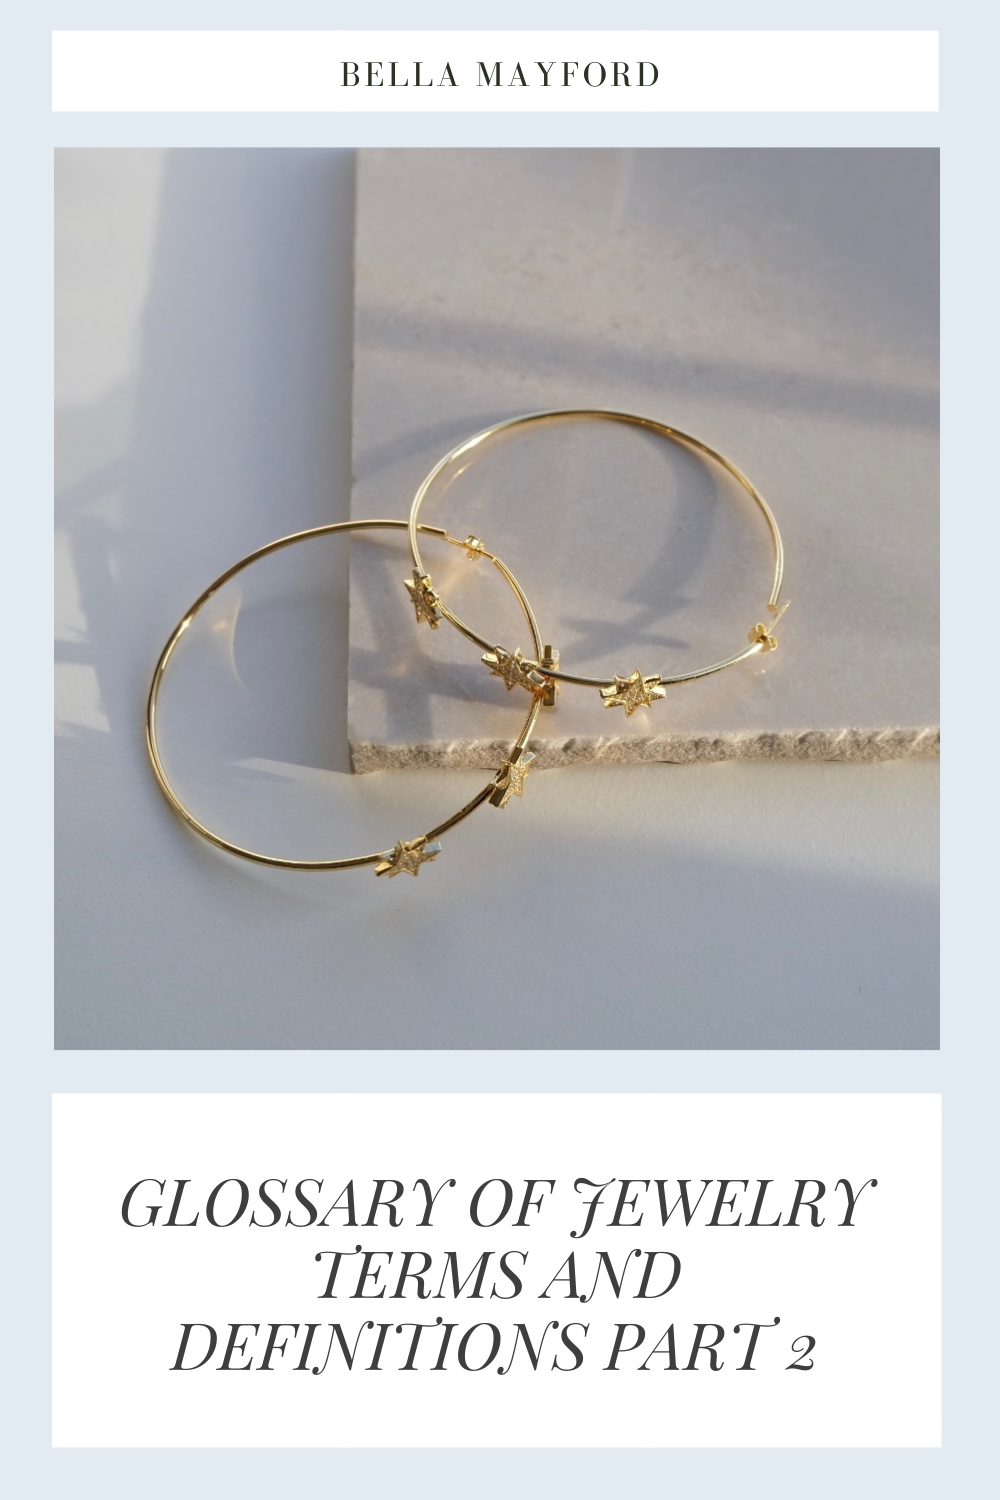 GLOSSARY OF JEWELRY TERMS AND DEFINITIONS PART 2